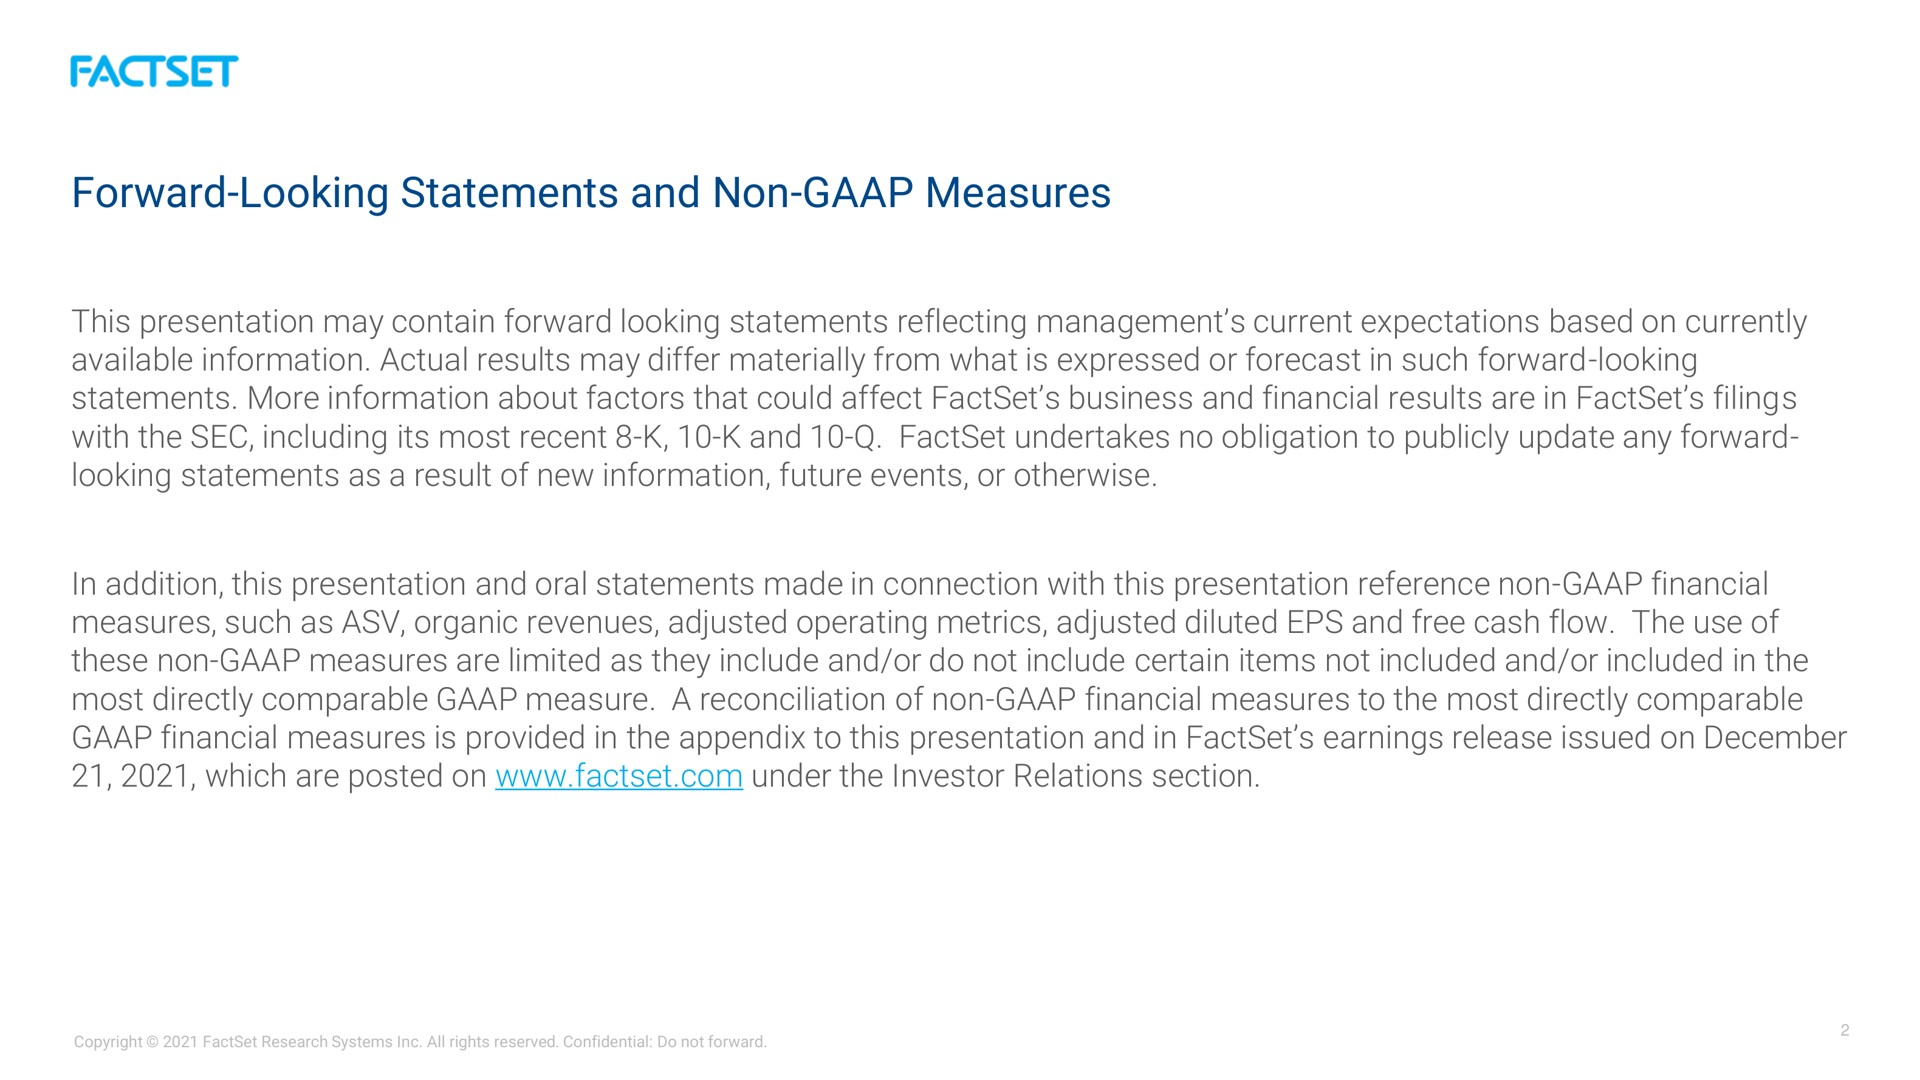 forward looking statements and non measures | Factset